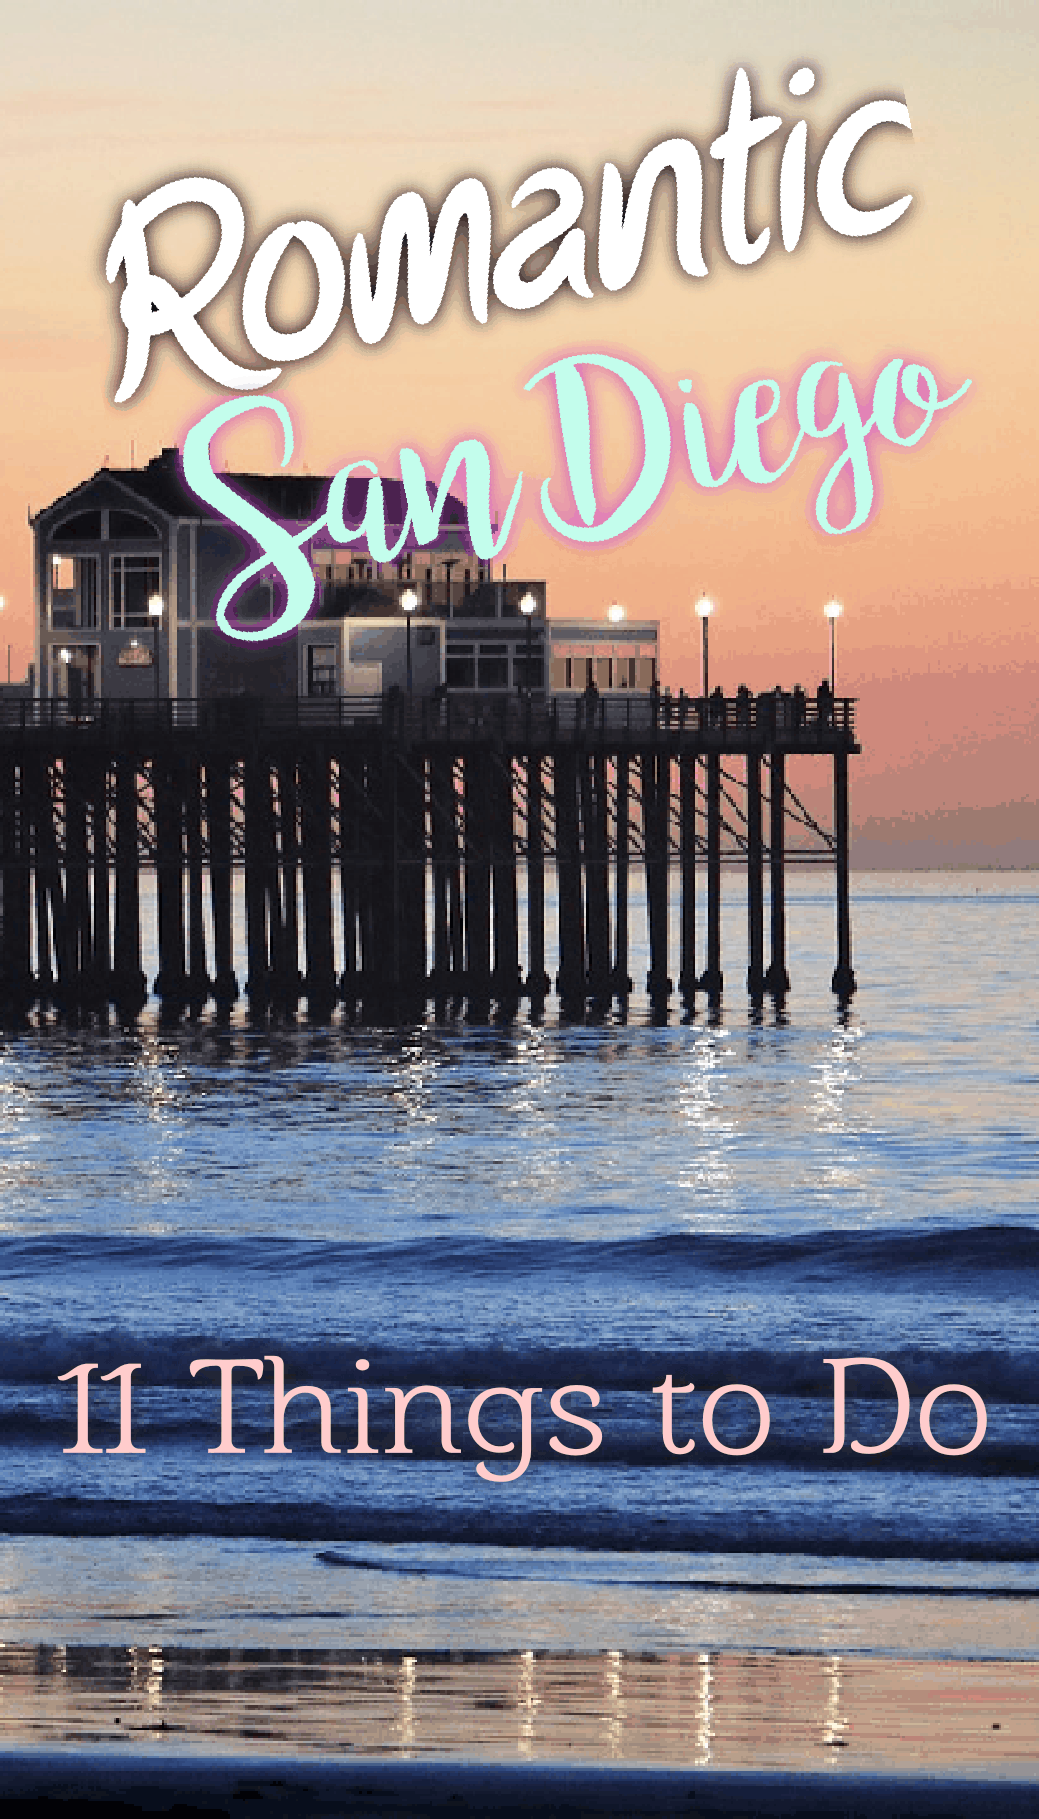 Pinterest social image that says “Romantic San Diego. 11 things to do.”